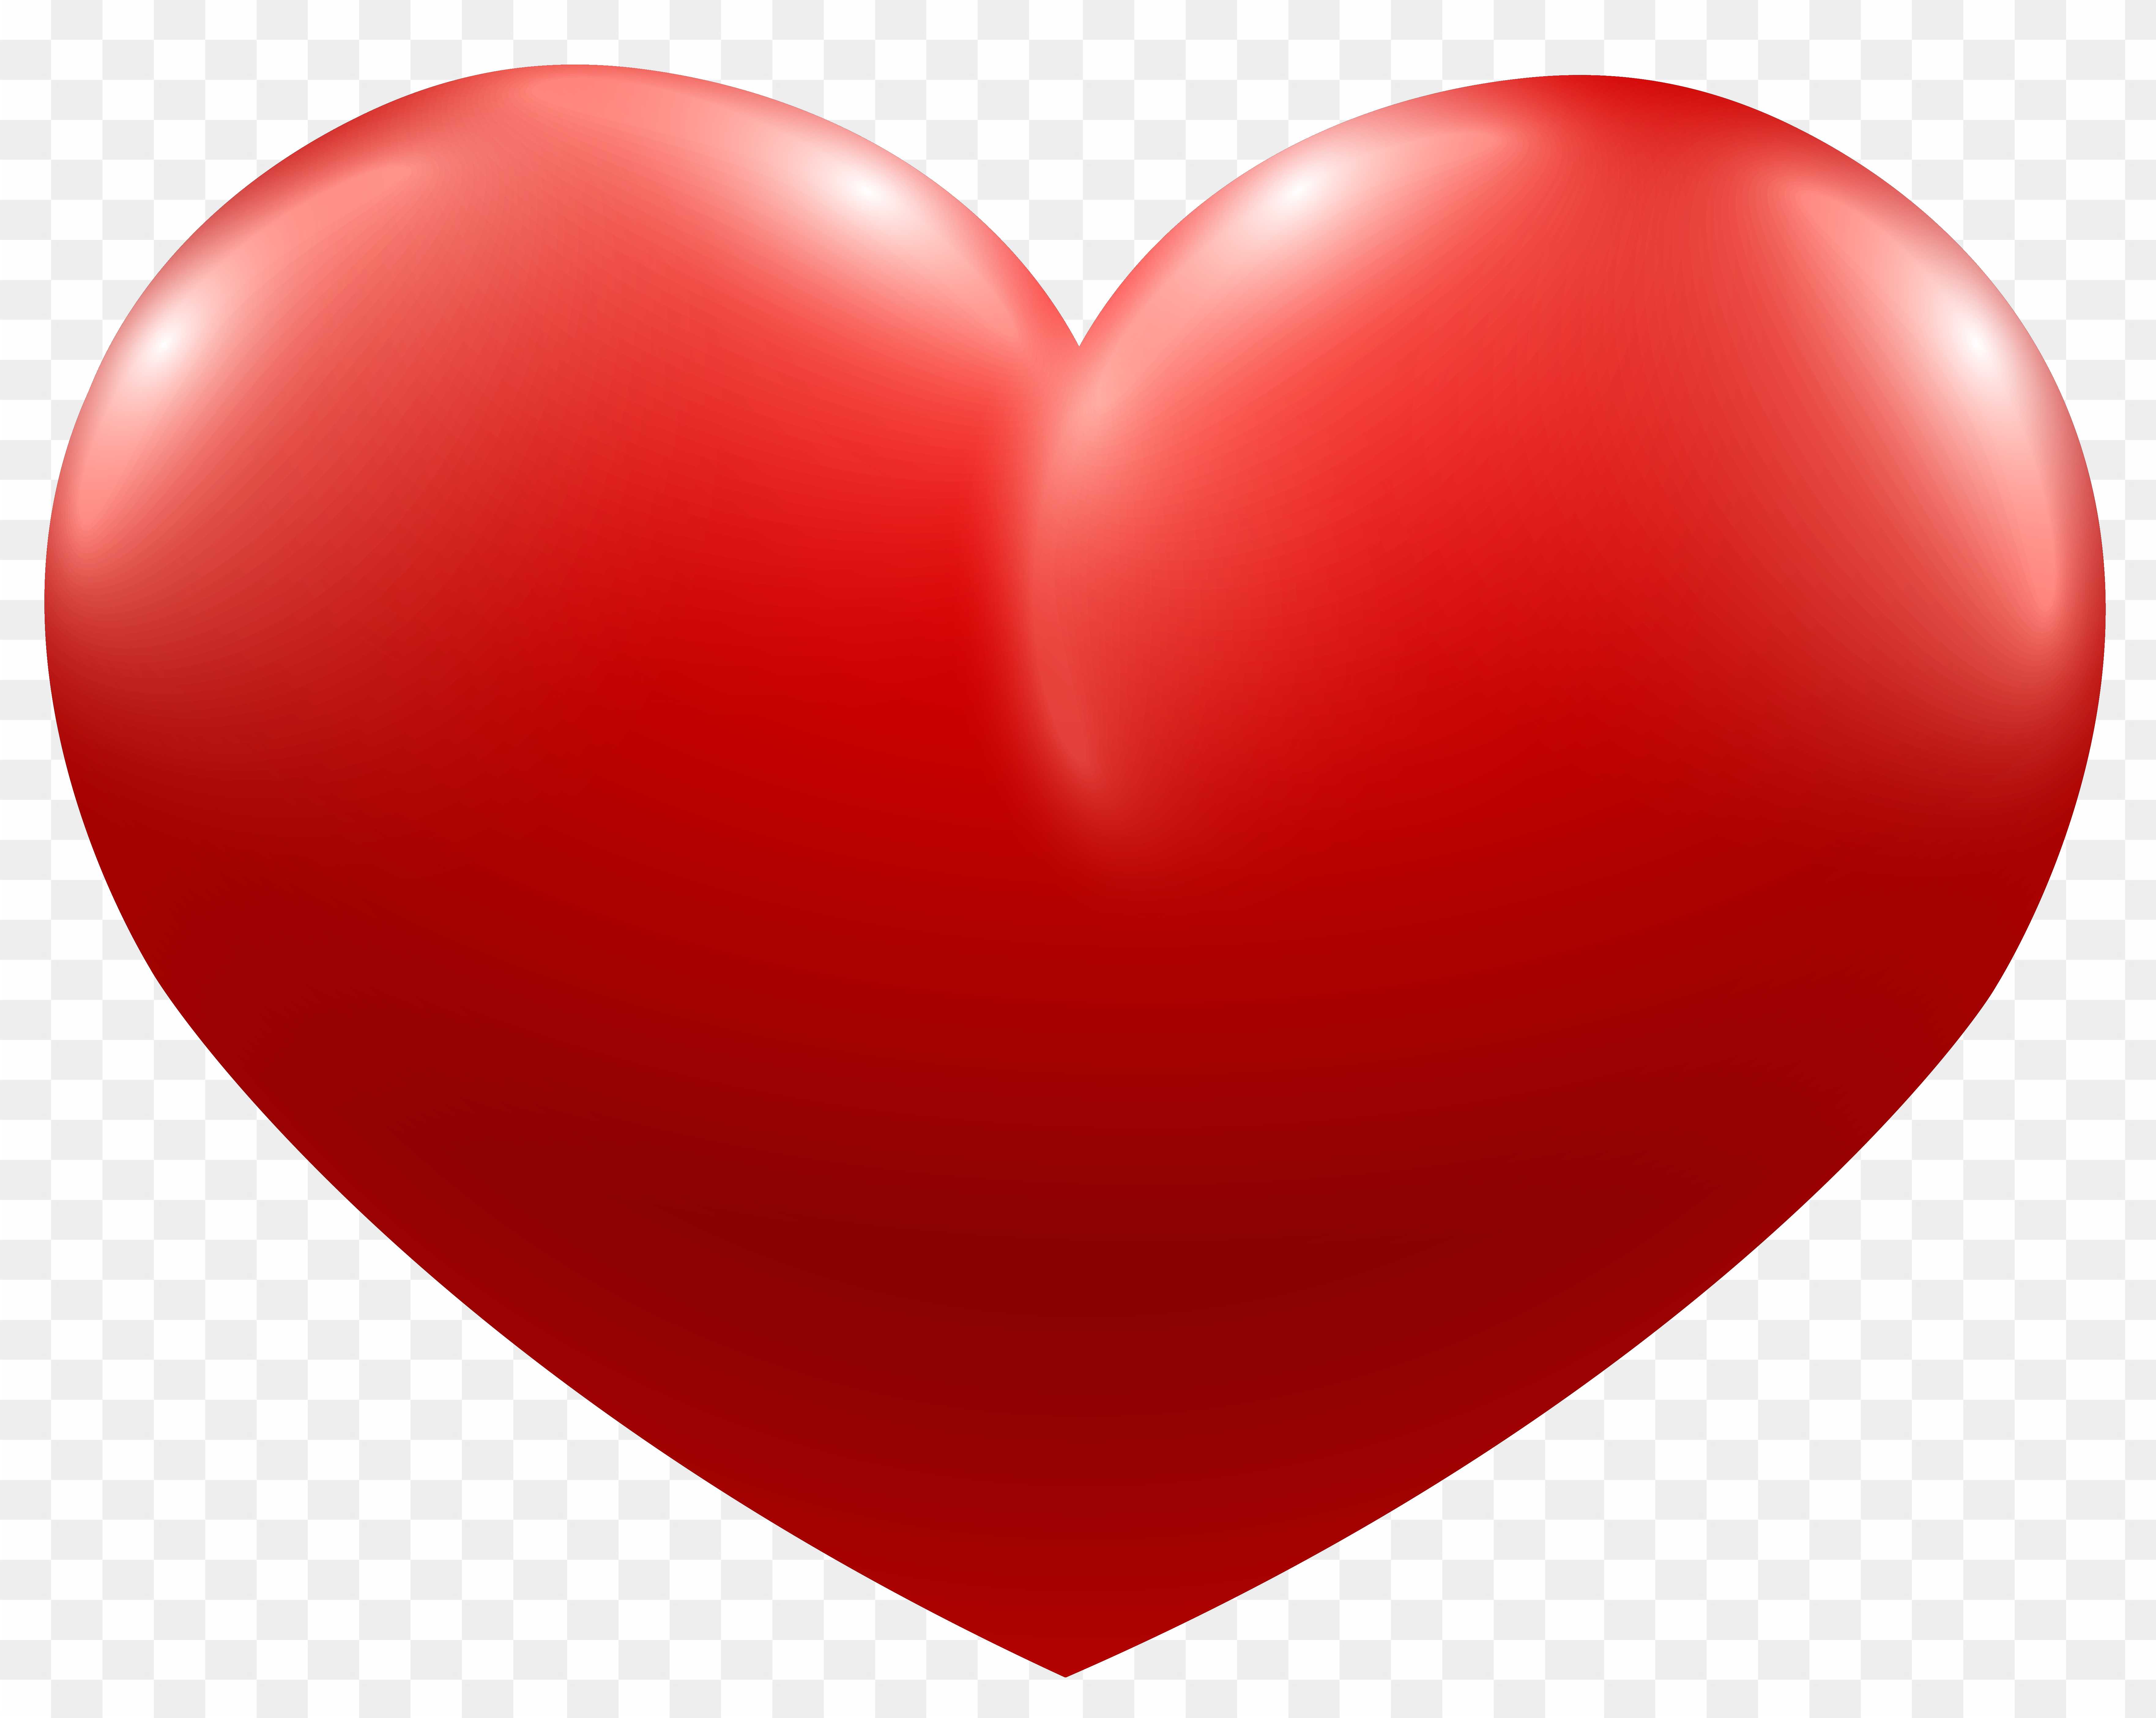 Red Heart png images download